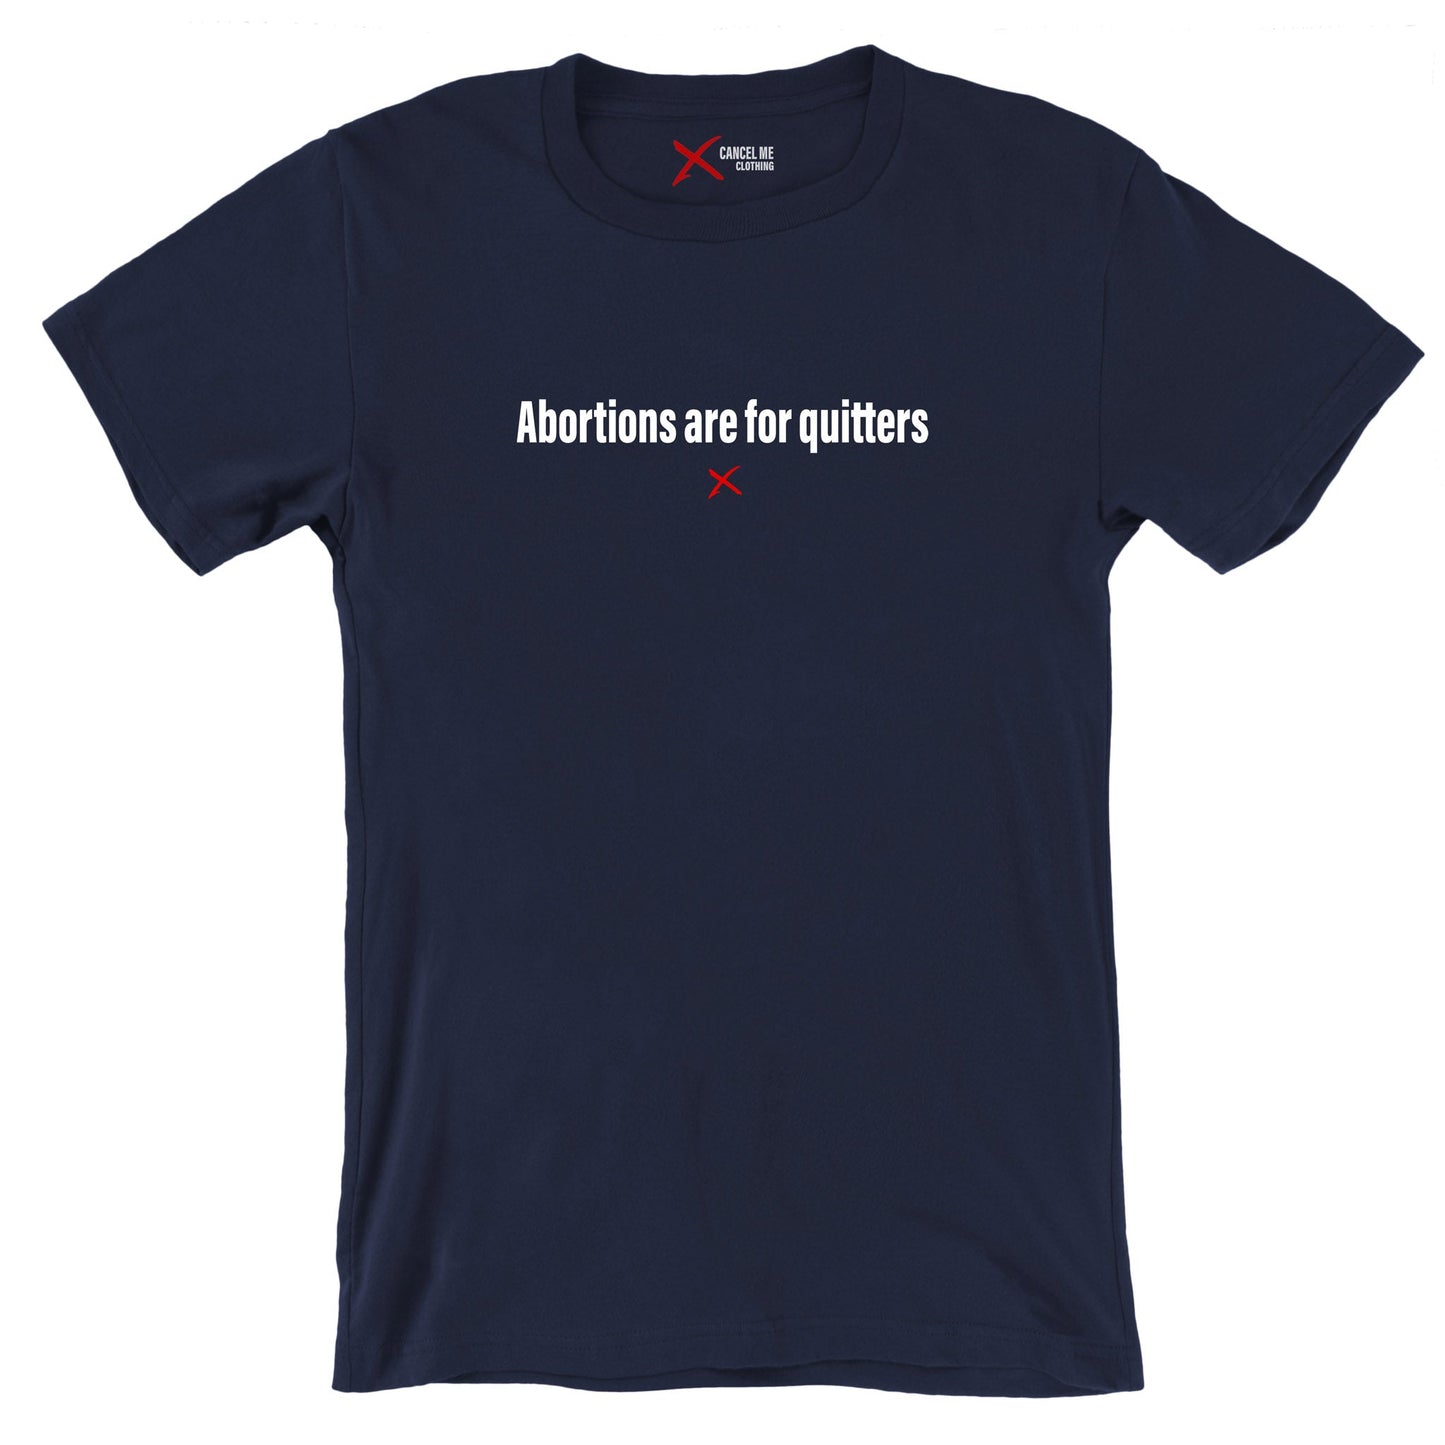 Abortions are for quitters - Shirt